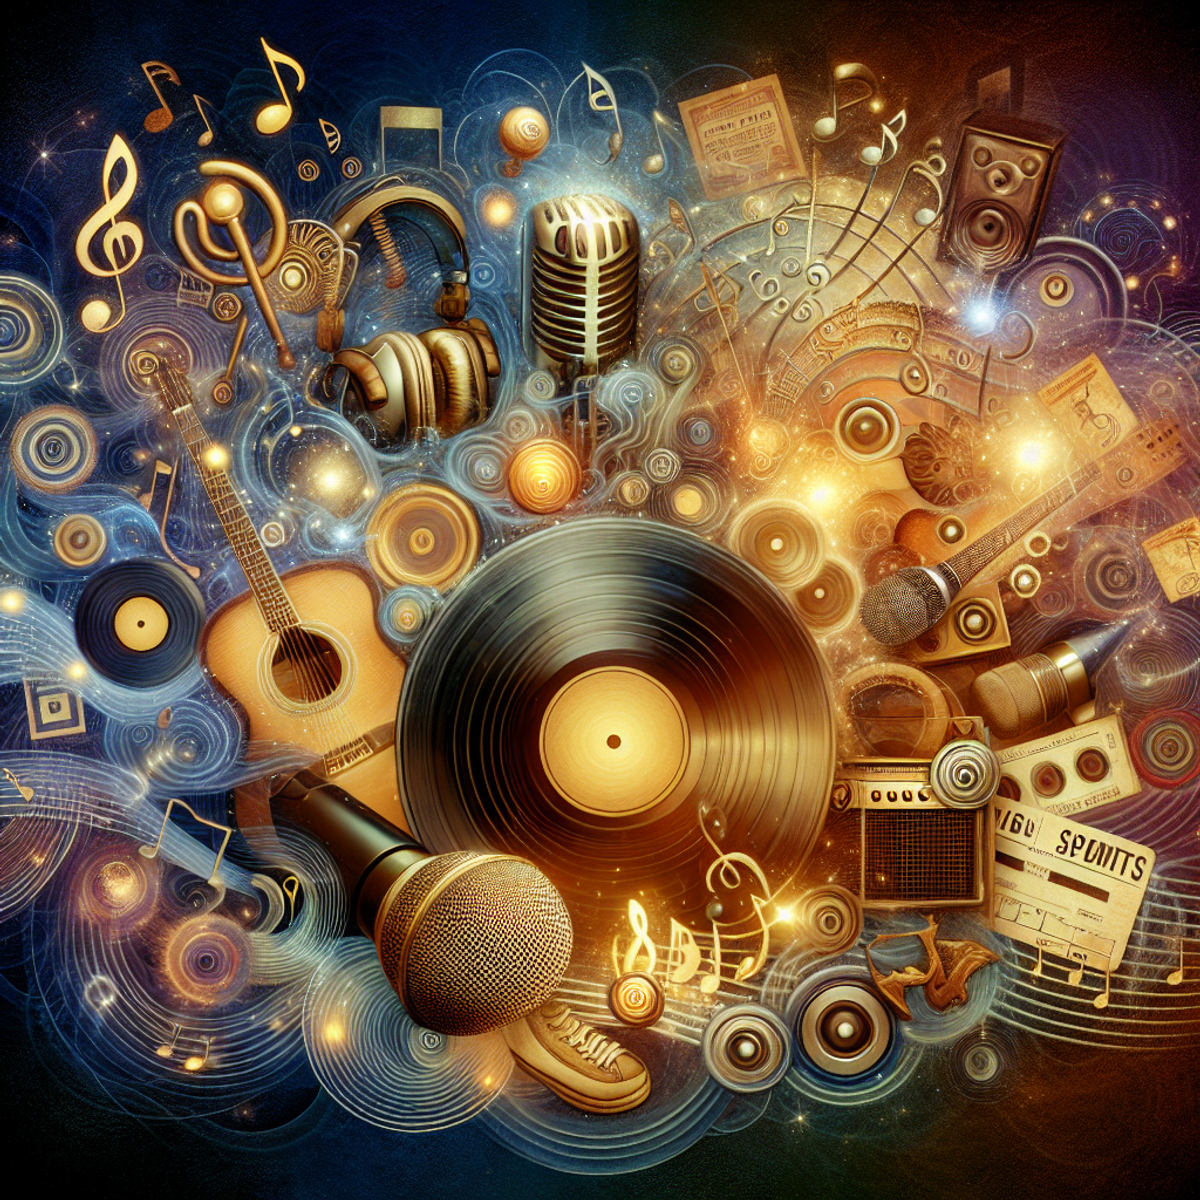 A montage of music memorabilia symbols including golden records, acoustic guitars, microphones, treble clefs, headphones, concert tickets stubs, and vinyl records arranged in a dynamic composition against an abstract colorful backdrop.